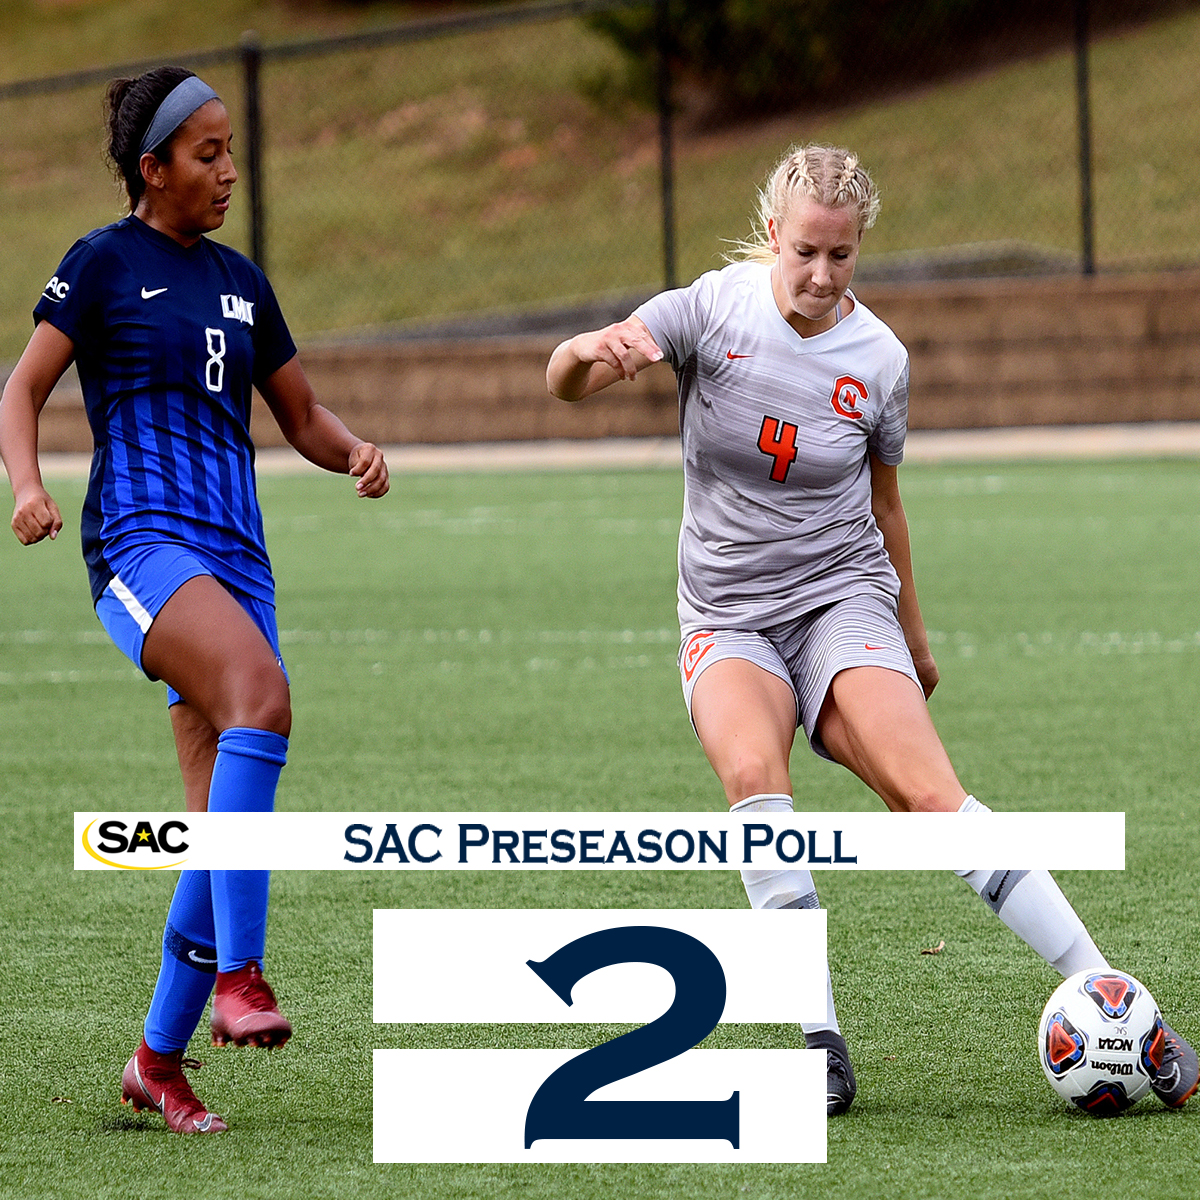 Eagles ranked second in preseason poll, four named to All-Conference poll